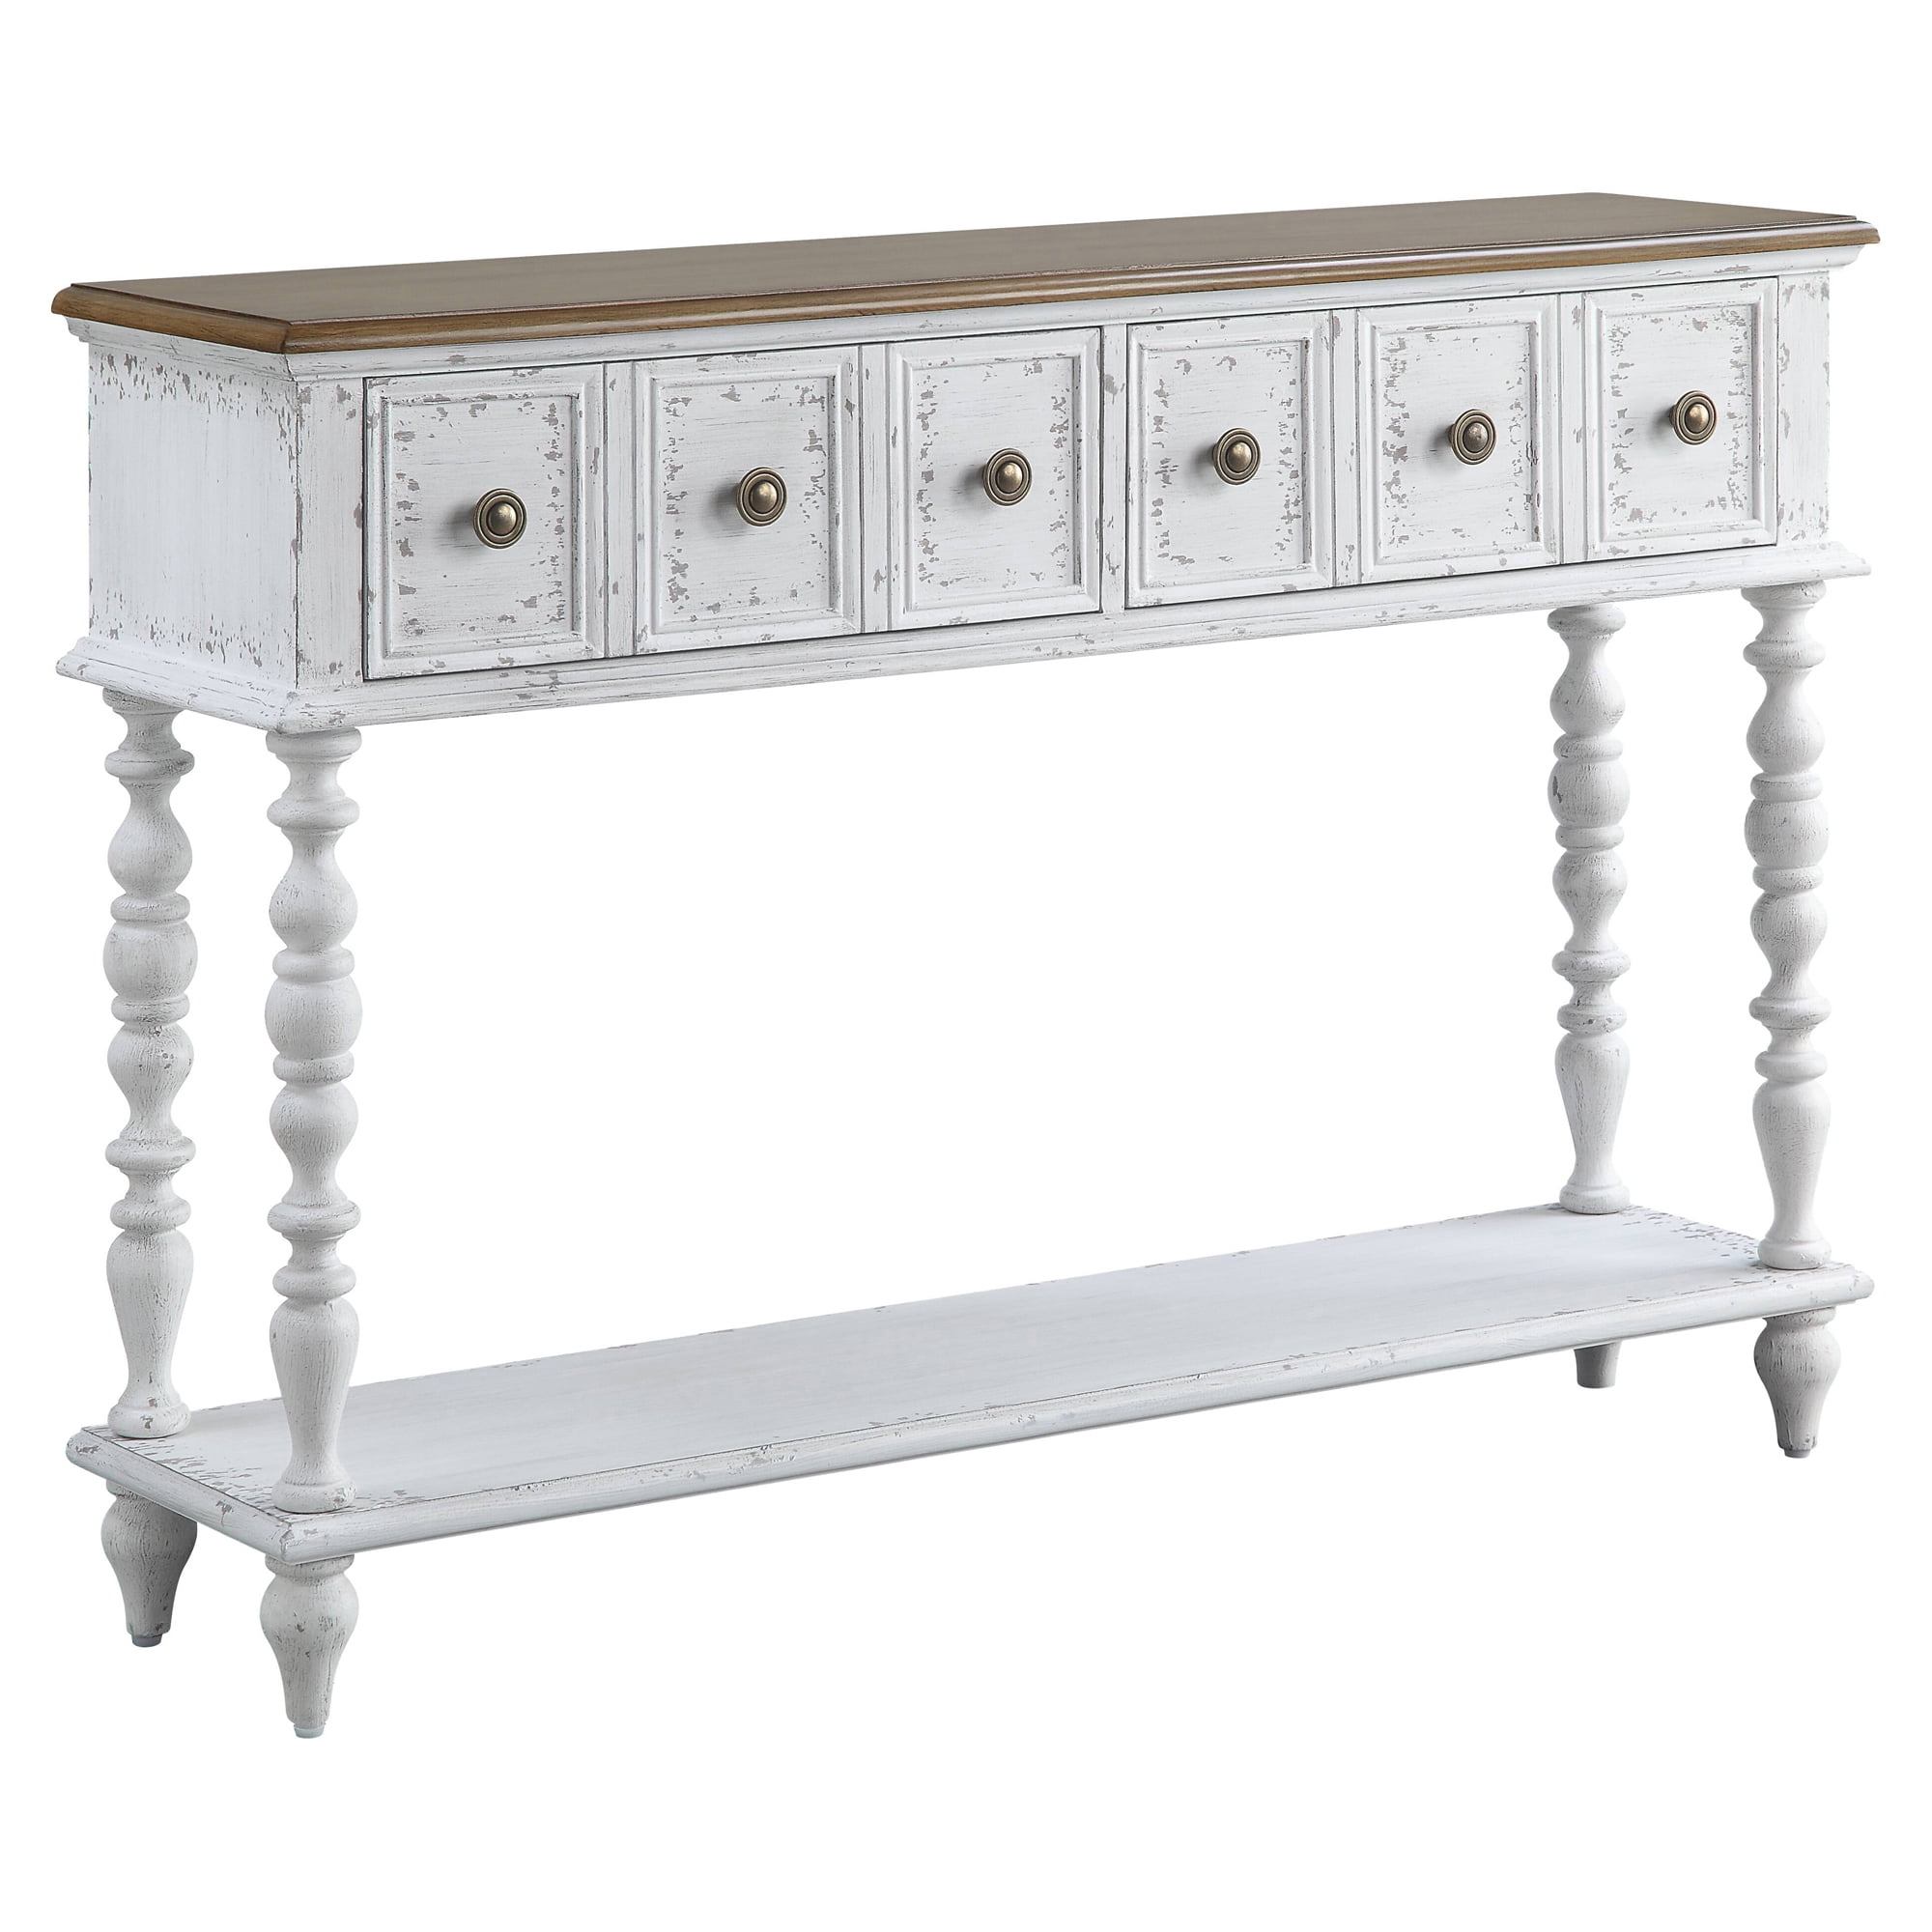 Picture of Acme Furniture AC00280 33 x 12 x 48 in. Bence Console Table